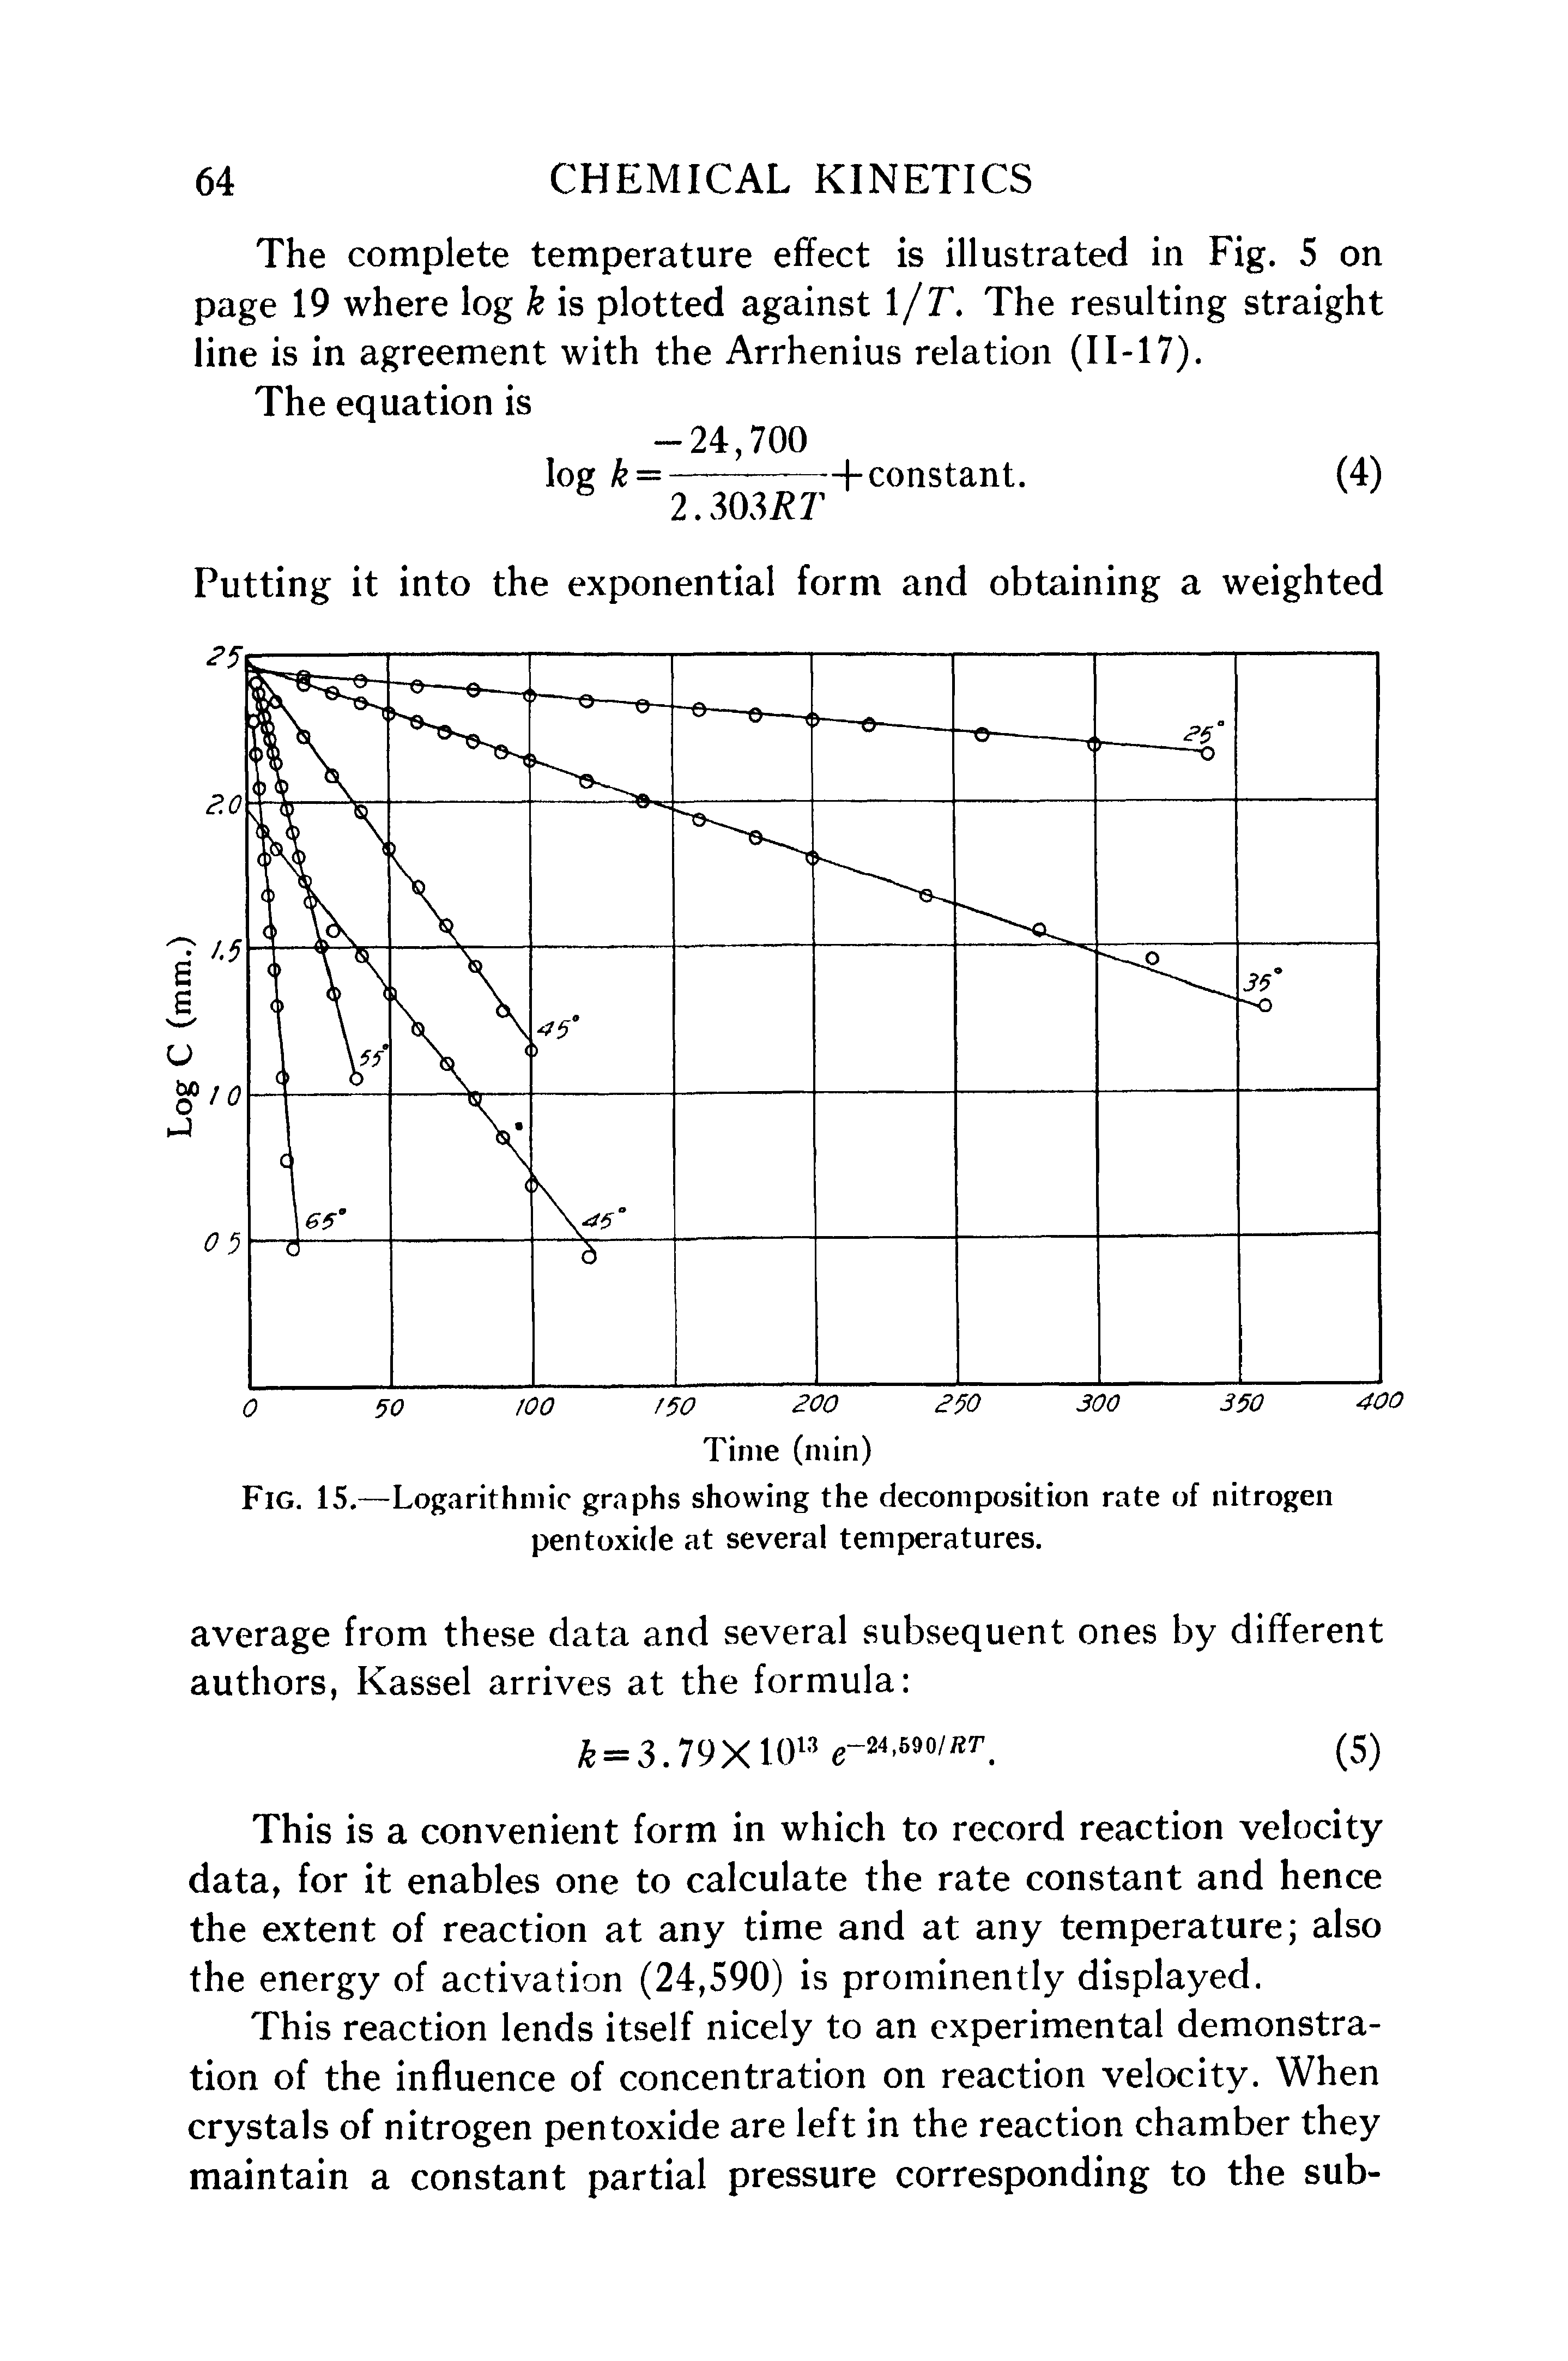 Fig. 15.—Logarithmic graphs showing the decomposition rate of nitrogen pentoxide at several temperatures.